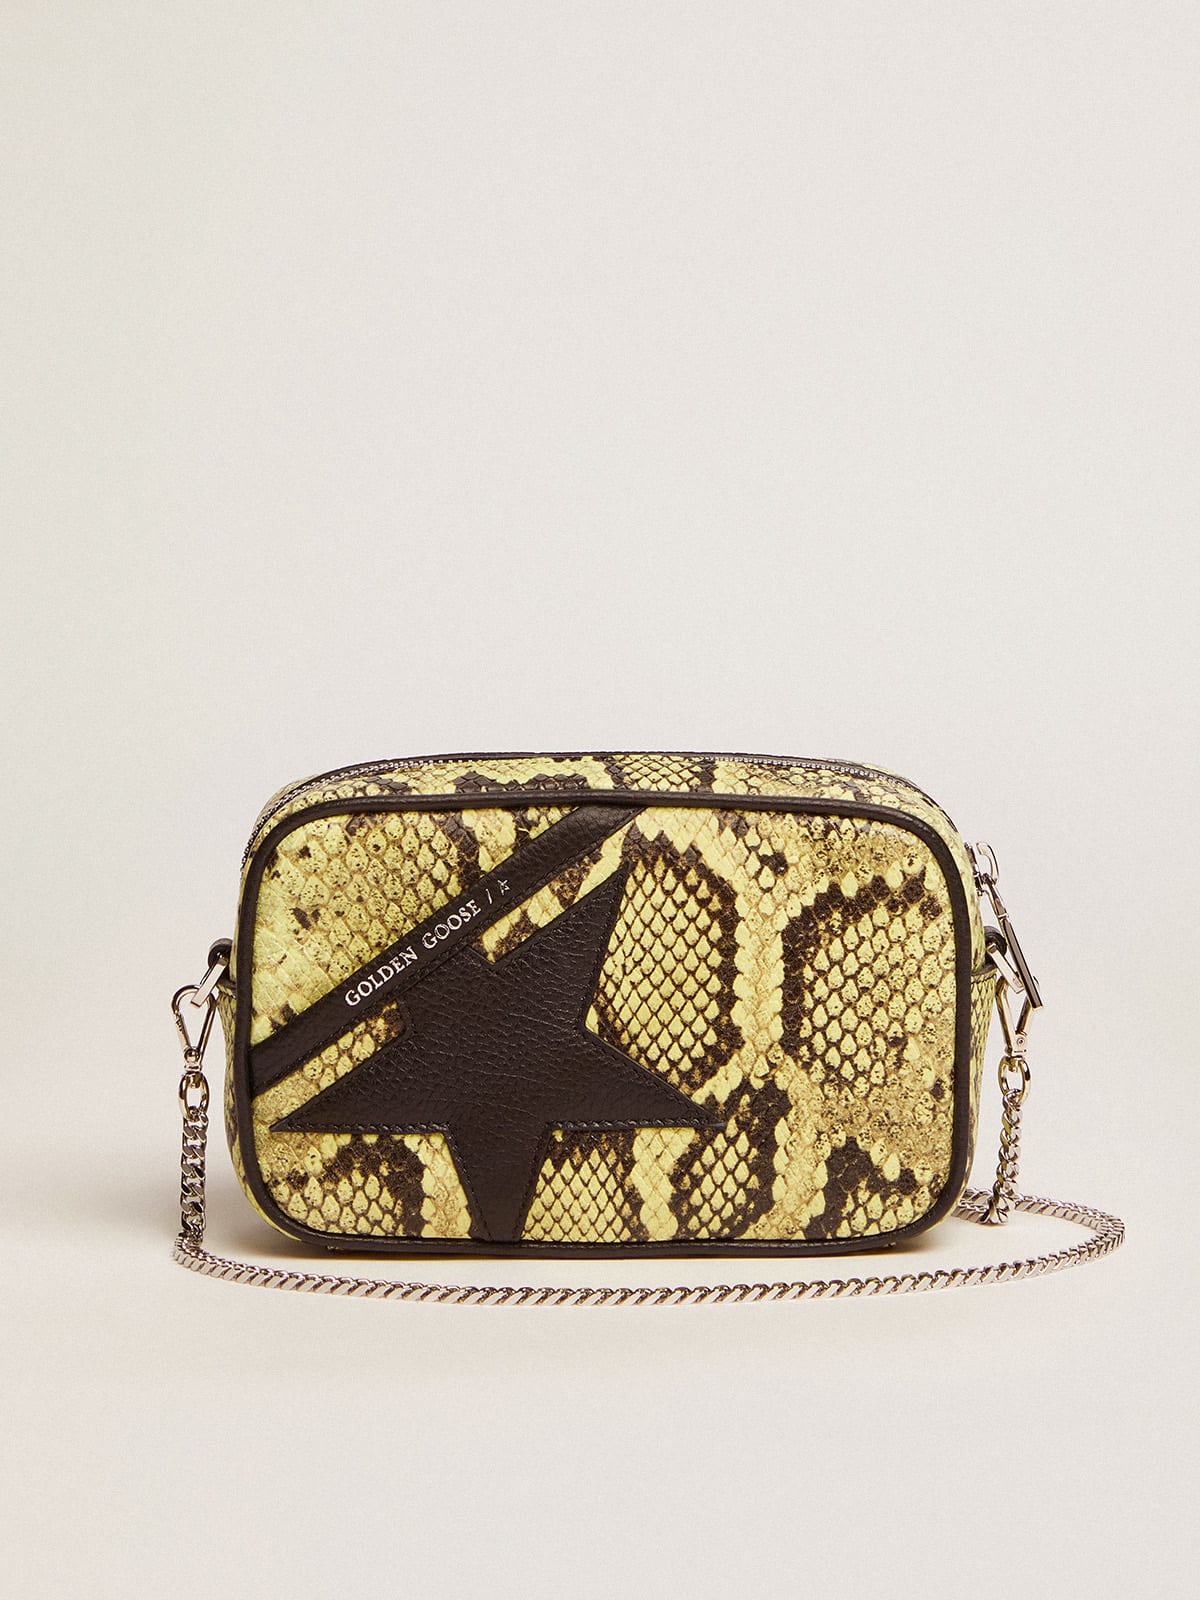 Golden Goose - Women's Mini Star Bag in lime green snake print leather with black star in 